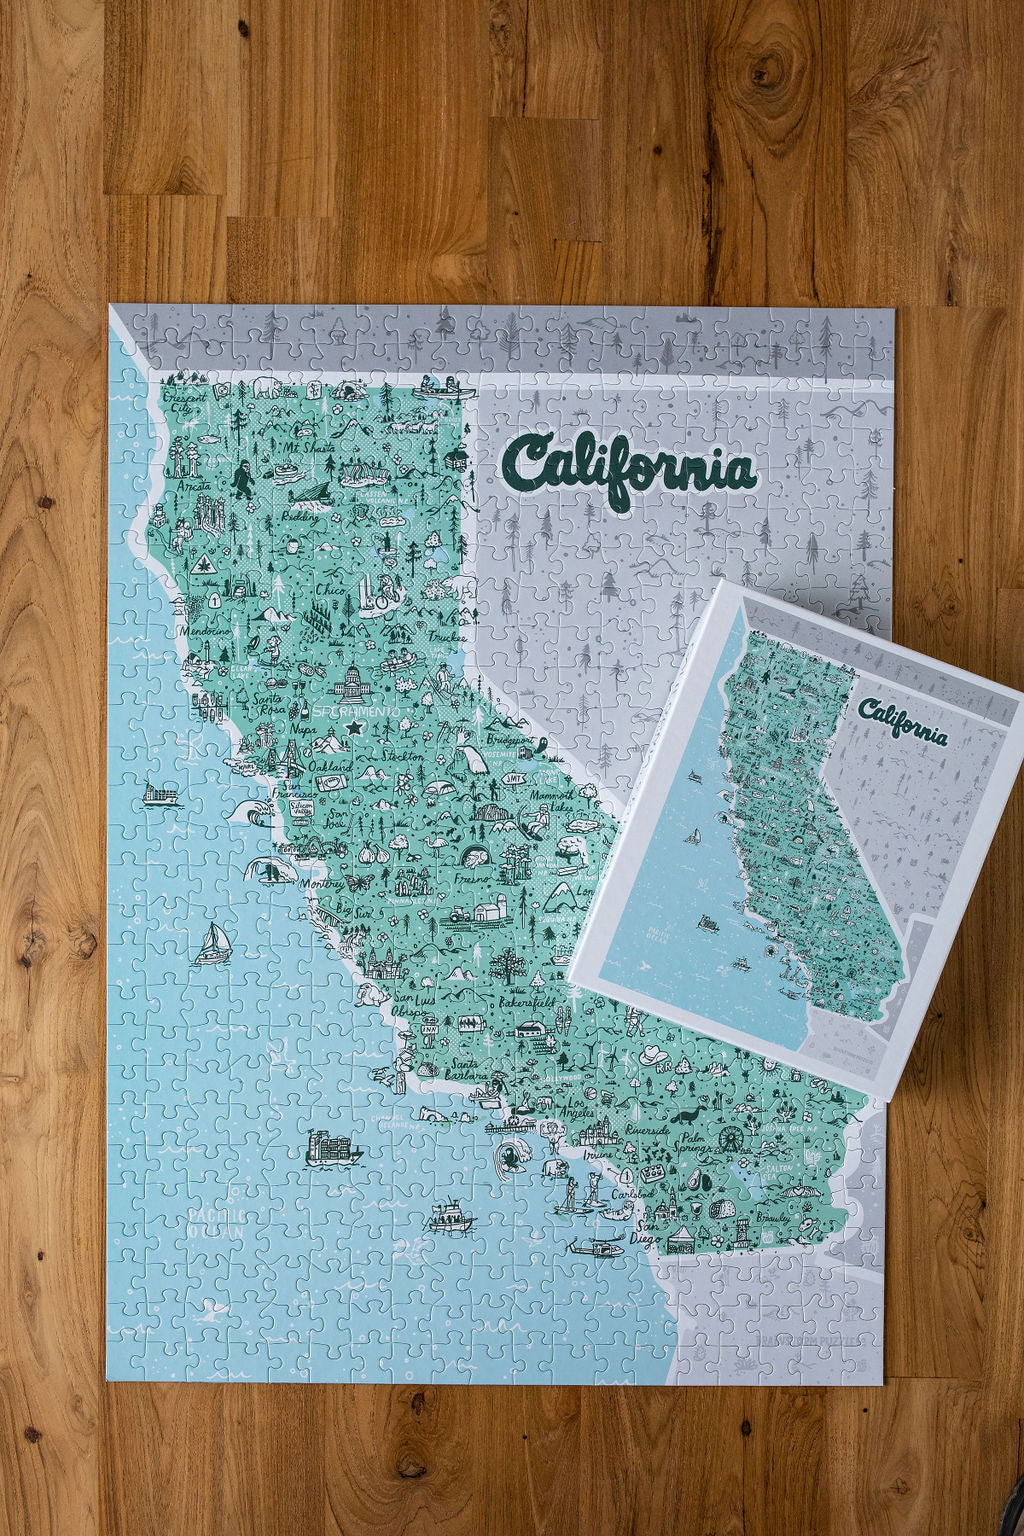 State of California Jigsaw Puzzle by Brainstorm